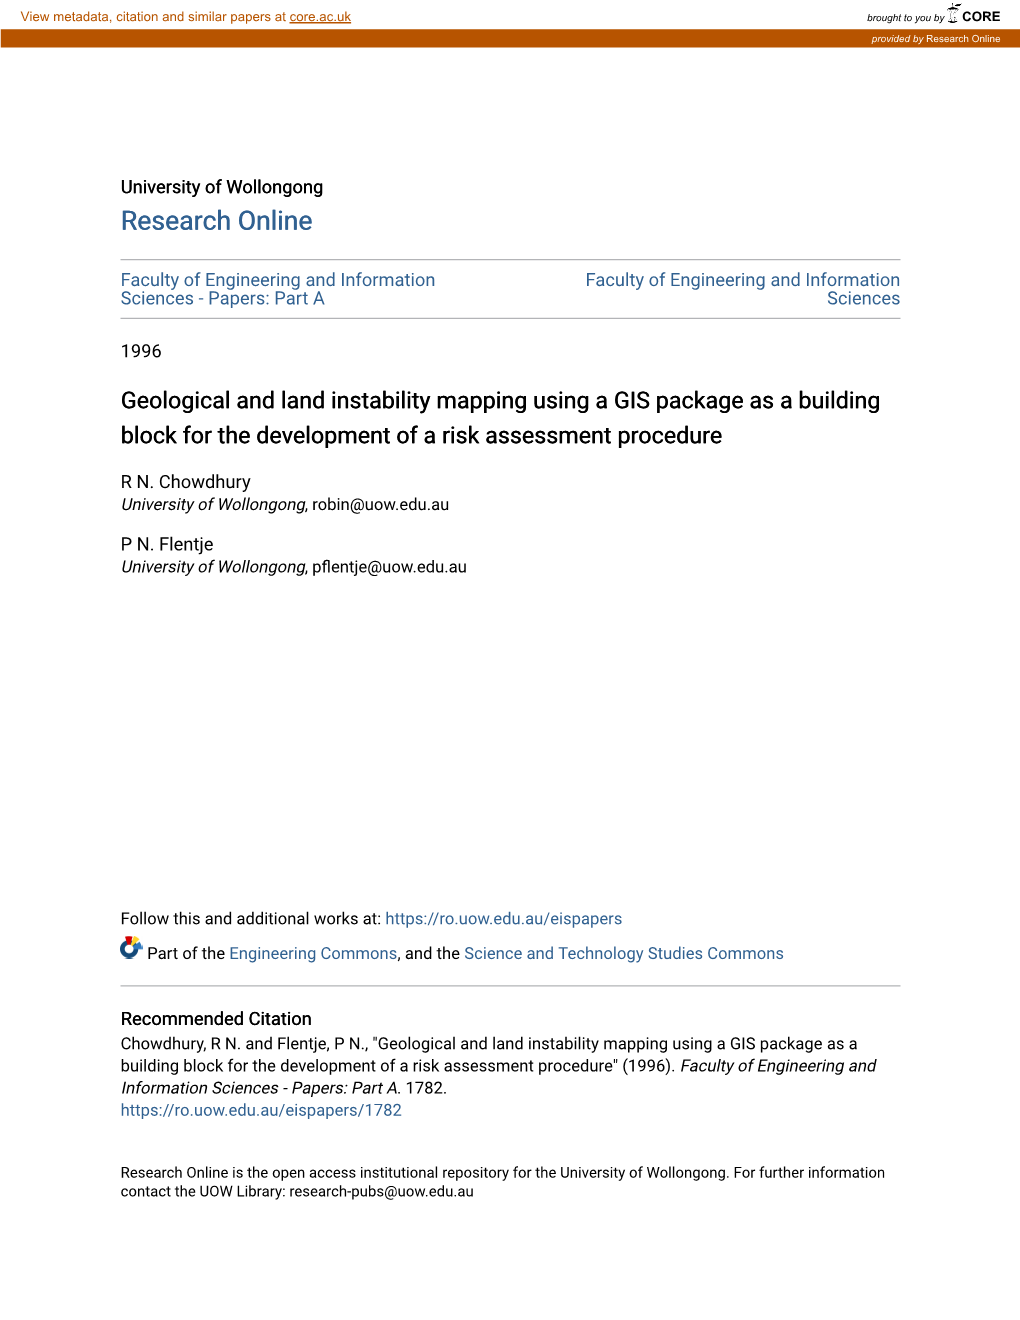 Geological and Land Instability Mapping Using a GIS Package As a Building Block for the Development of a Risk Assessment Procedure